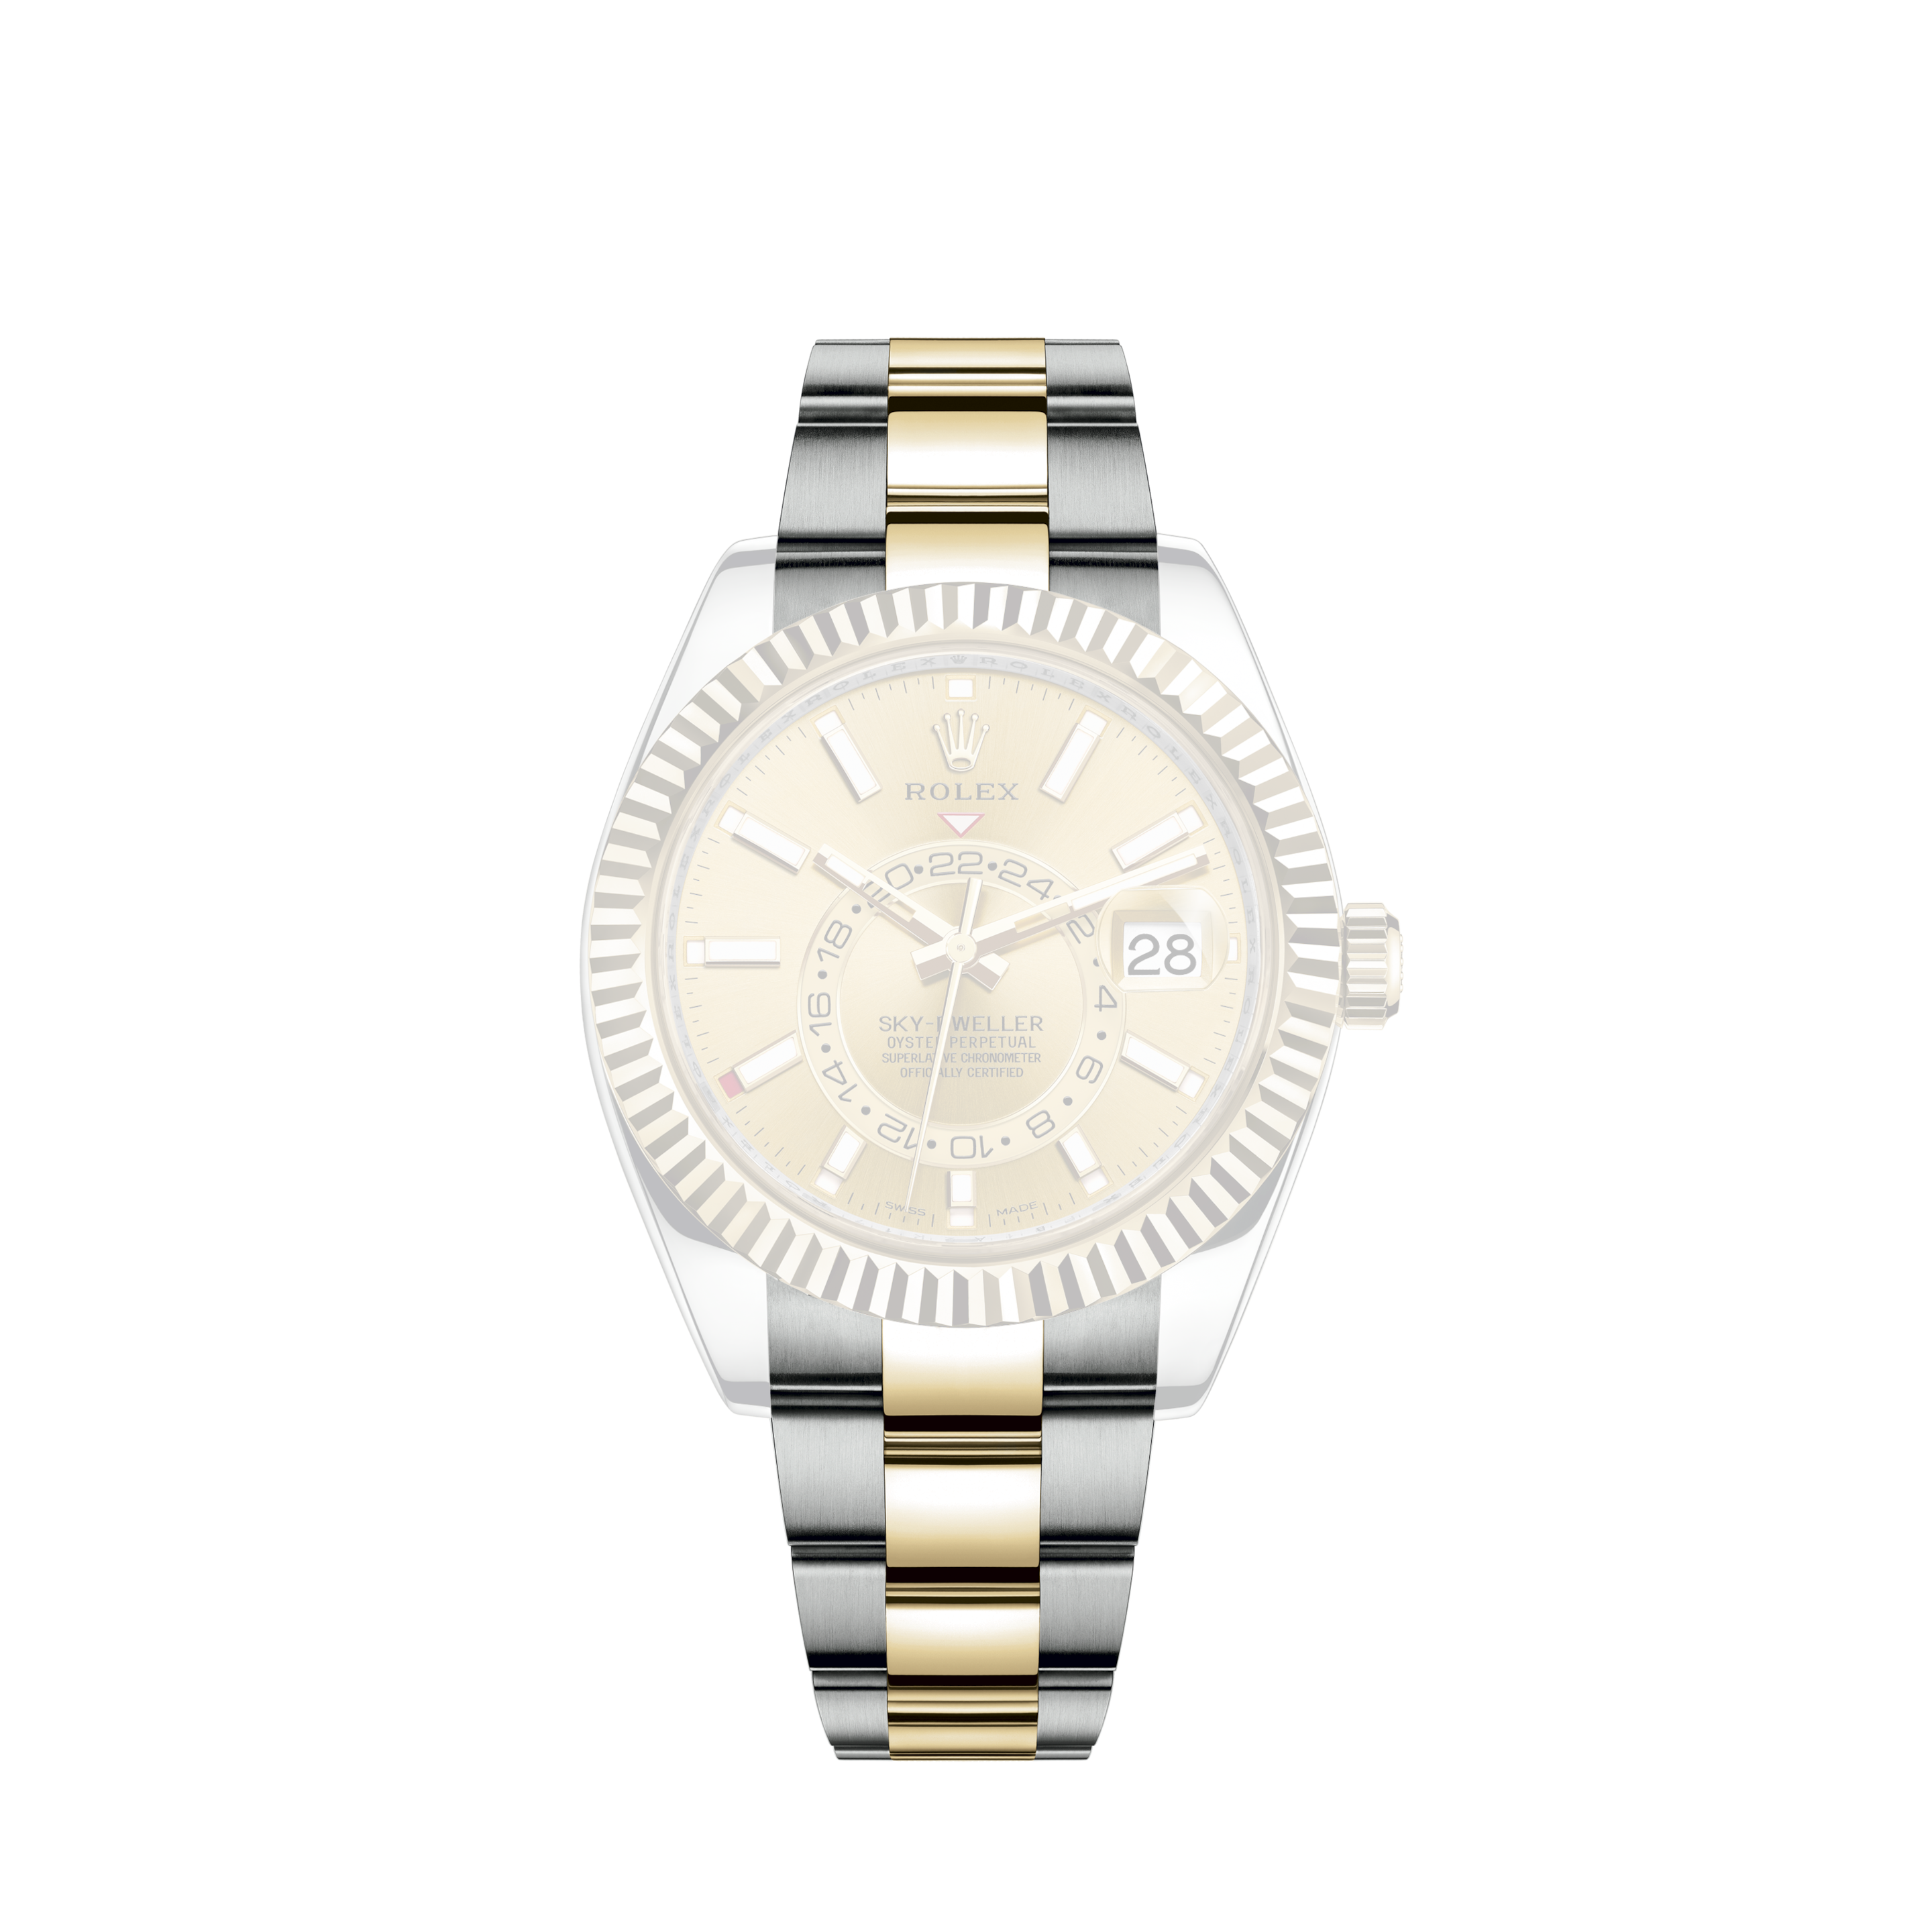 Rolex Datejust Steel/Gold Ref: 16013 from 1987 with Rolex Box